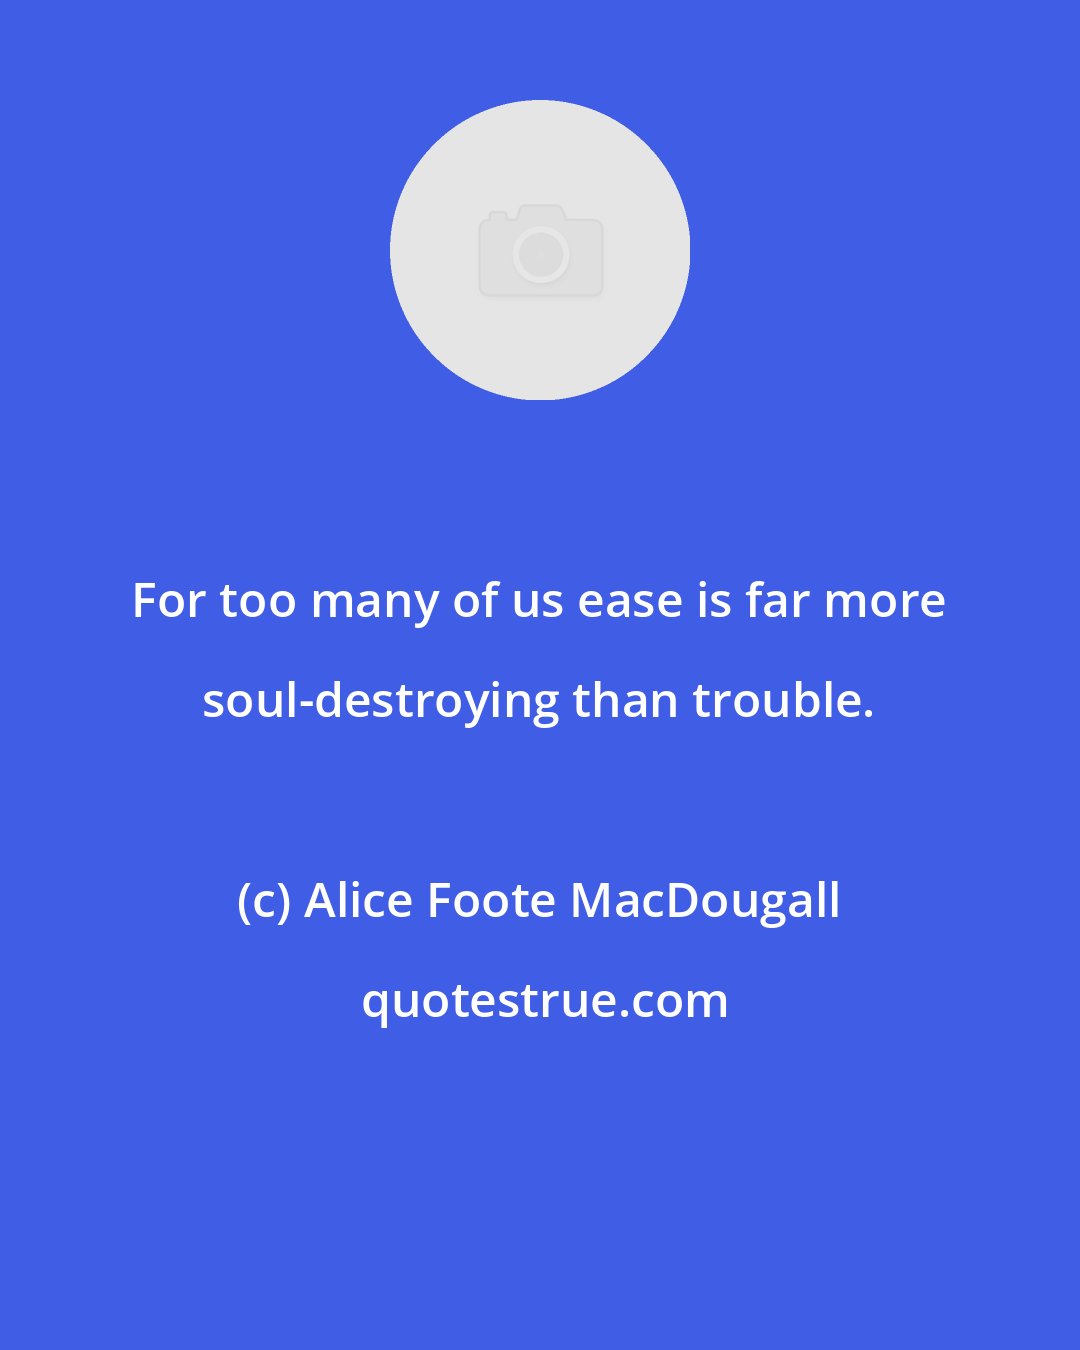 Alice Foote MacDougall: For too many of us ease is far more soul-destroying than trouble.